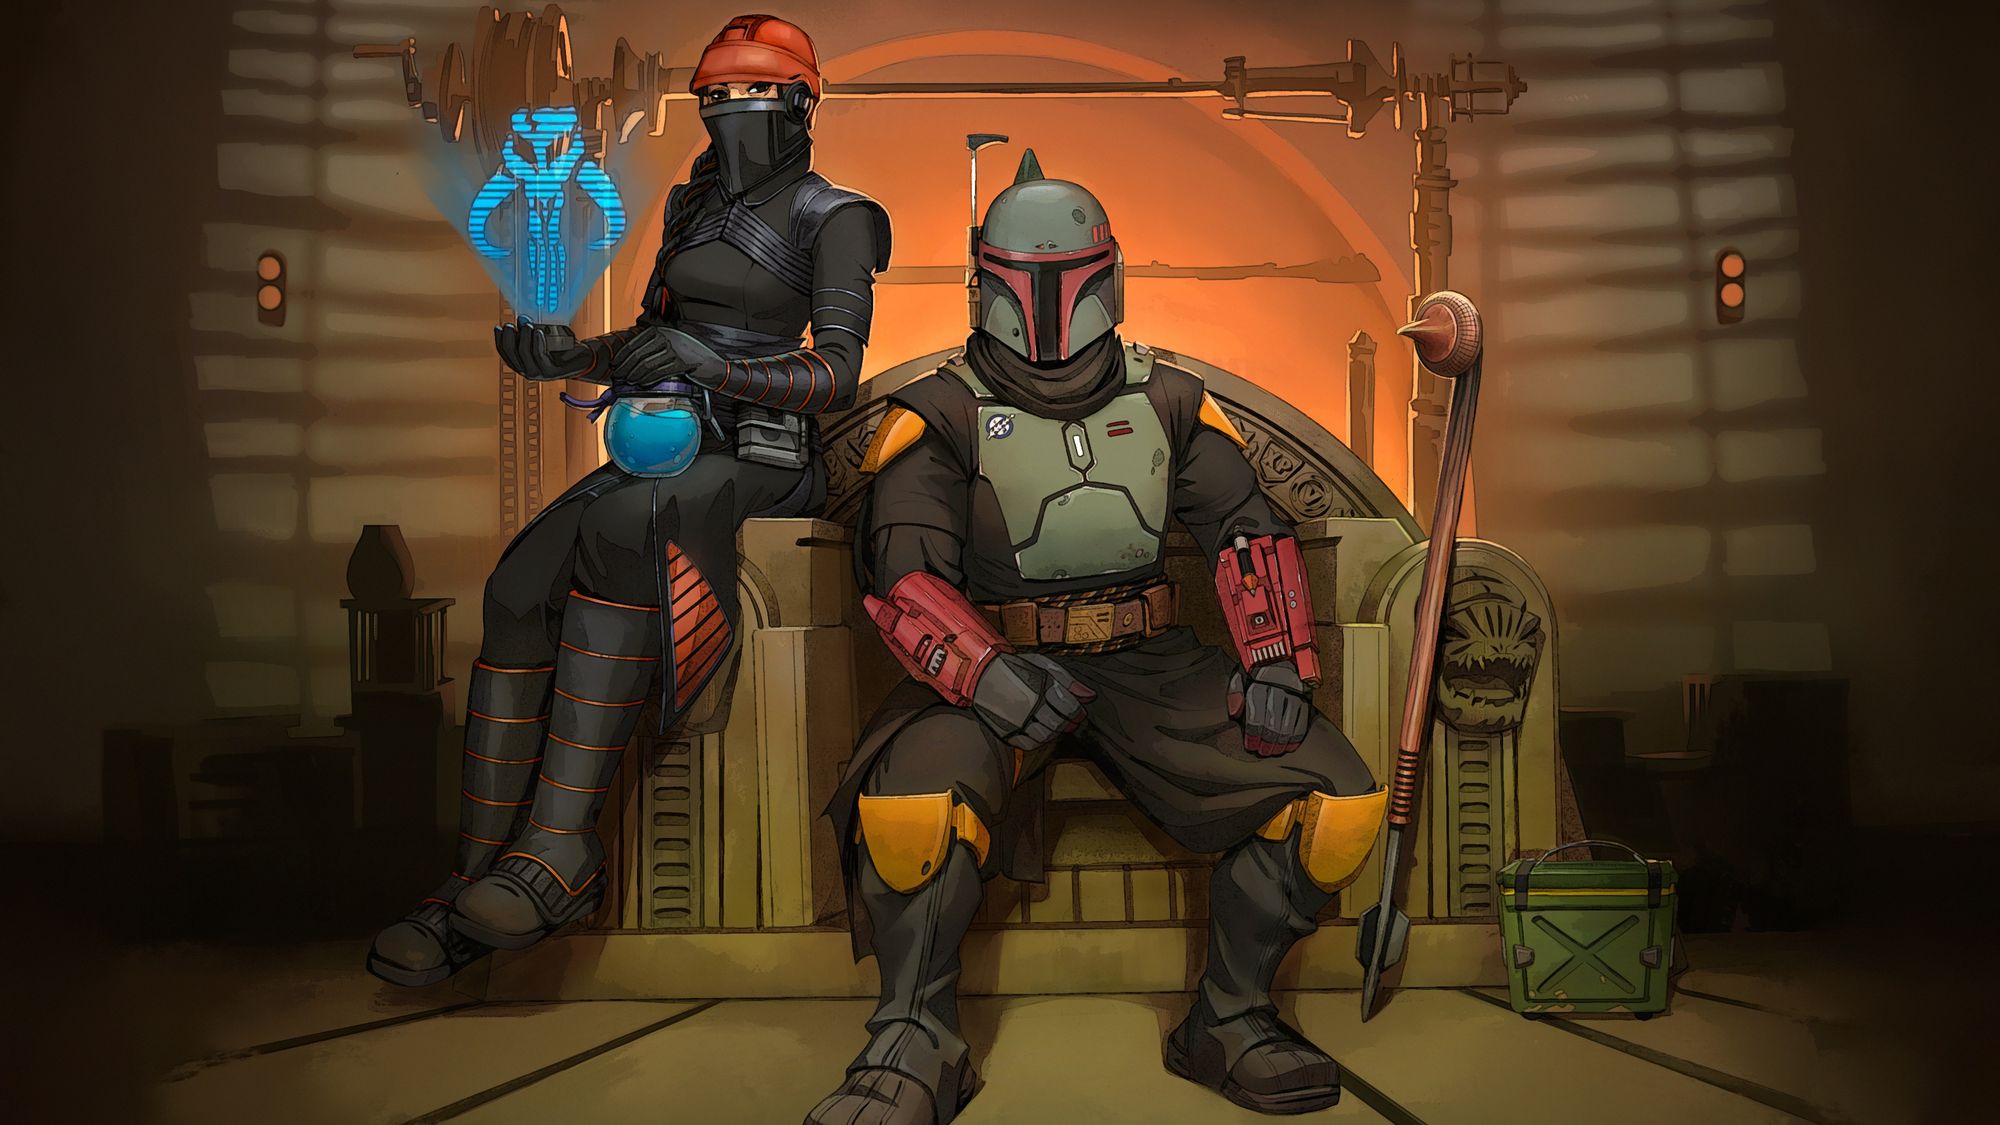 Image for Boba Fett Blasts his way into Fortnite on Christmas Eve